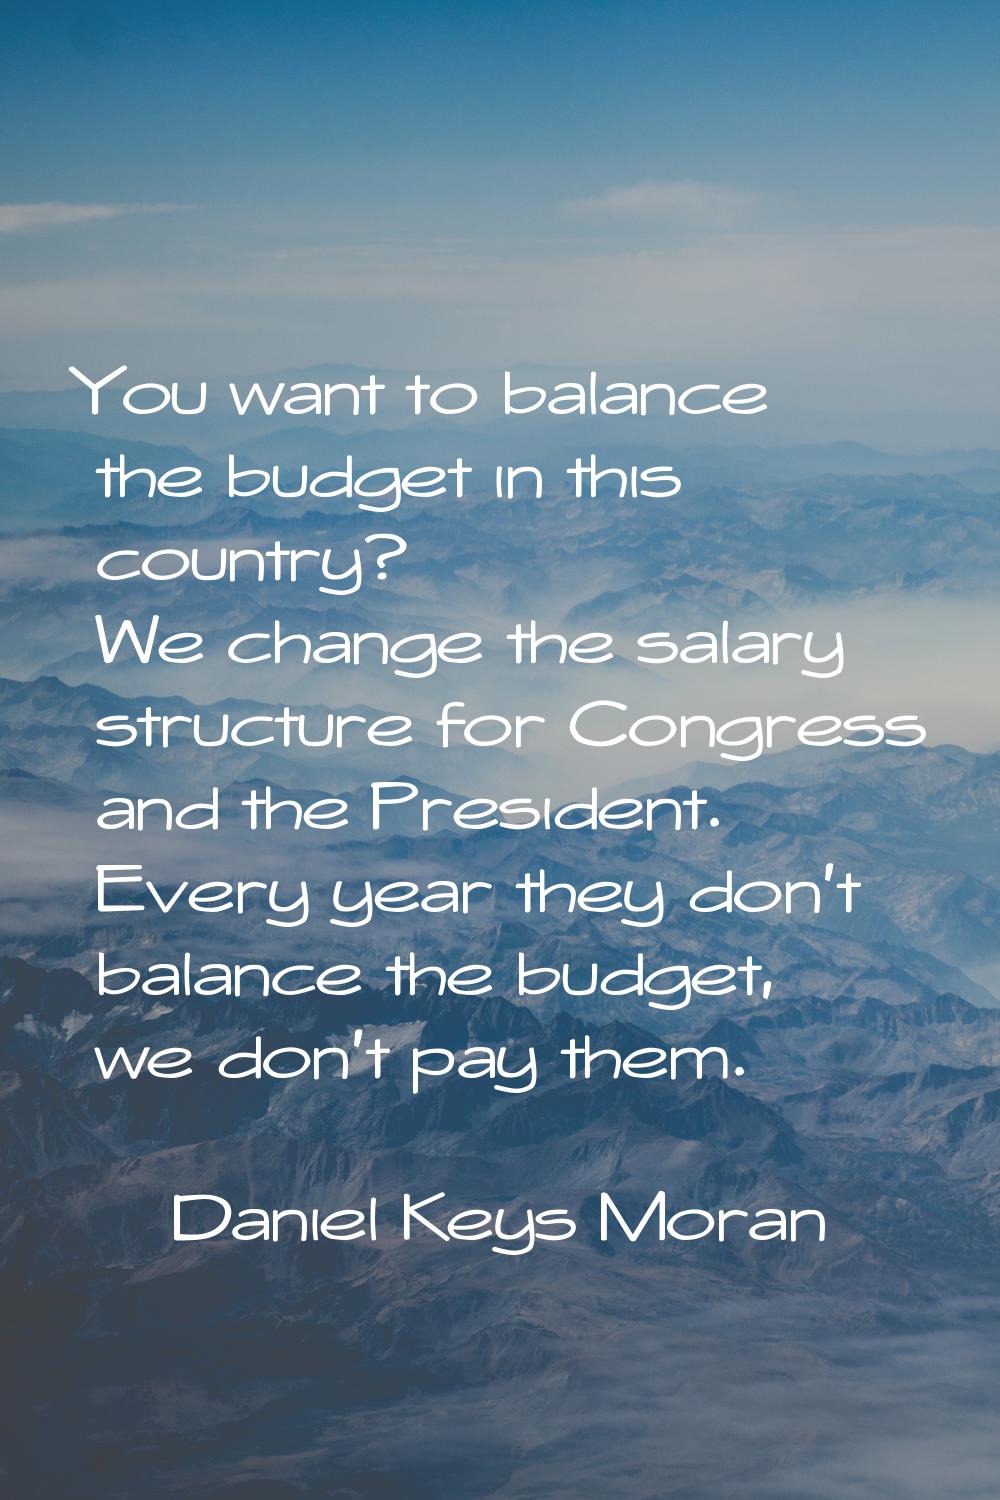 You want to balance the budget in this country? We change the salary structure for Congress and the